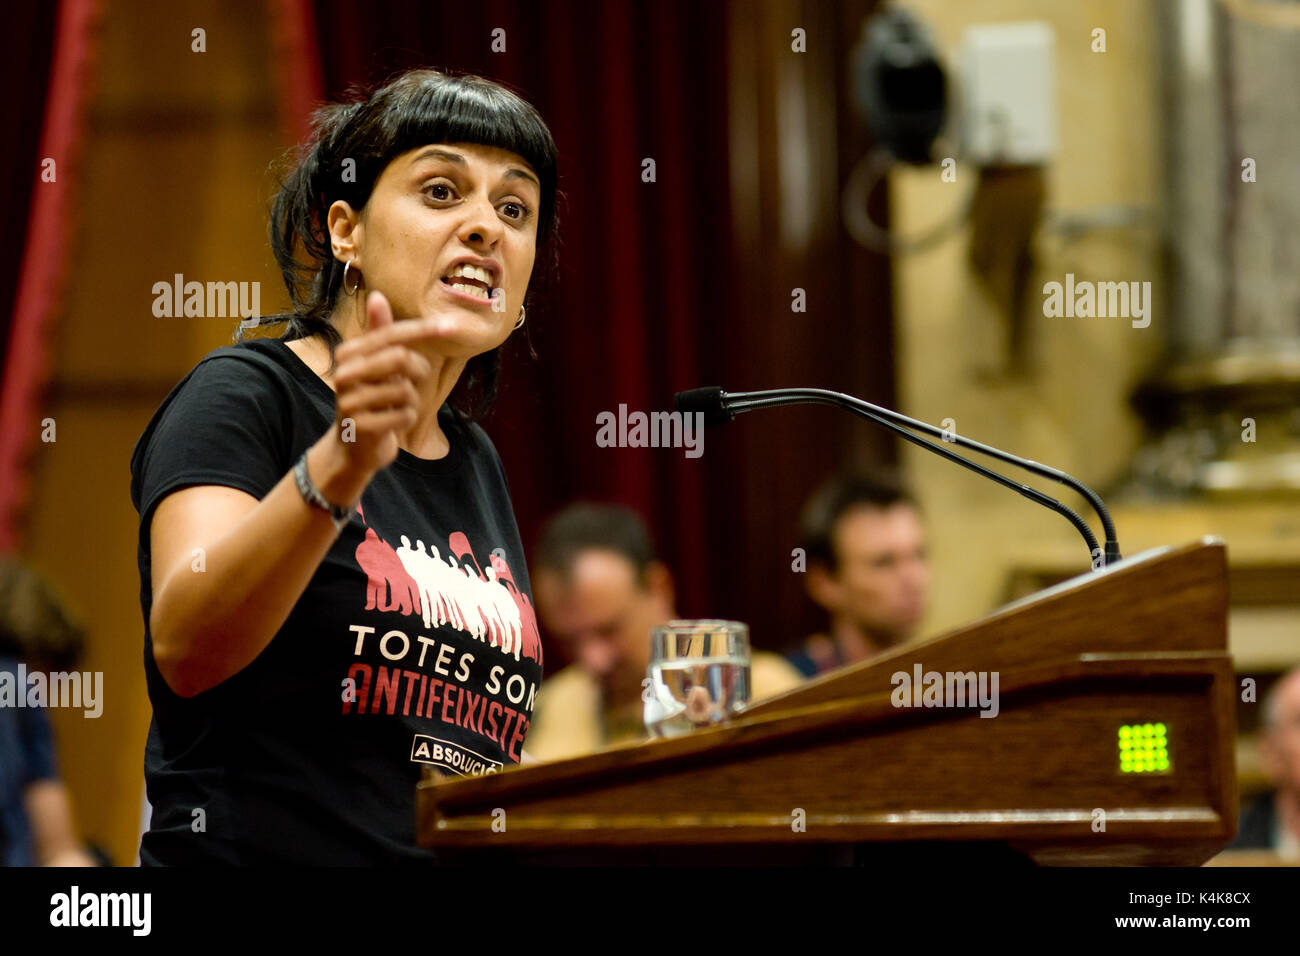 Barcelona, Spain. 06th Sep, 2017. September 6, 2017 - Barcelona, Catalonia, Spain - ANNA GABRIEL of pro-independence party CUP holds a speech during the parliamentary session in the Catalonia Parliament. The Catalan Parliament has passed a law to call a referendum of independence the next first of October. The unionist forces of Catalonia and the Spanish government are frontally opposed to the referendum and consider it illegal. Credit: Jordi Boixareu/Alamy Live News Stock Photo